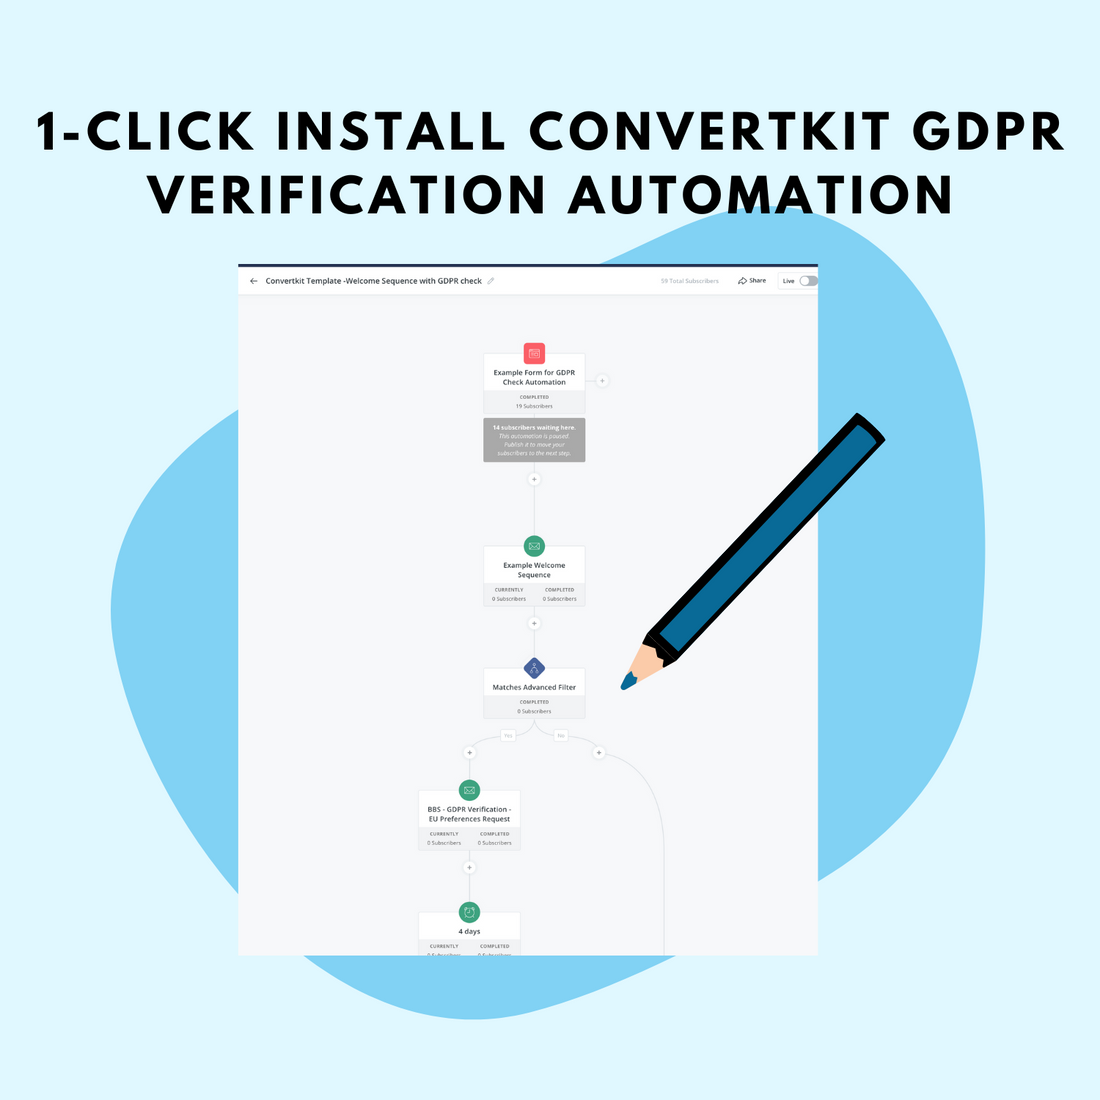 GDPR Verification Sequence for Convertkit Template